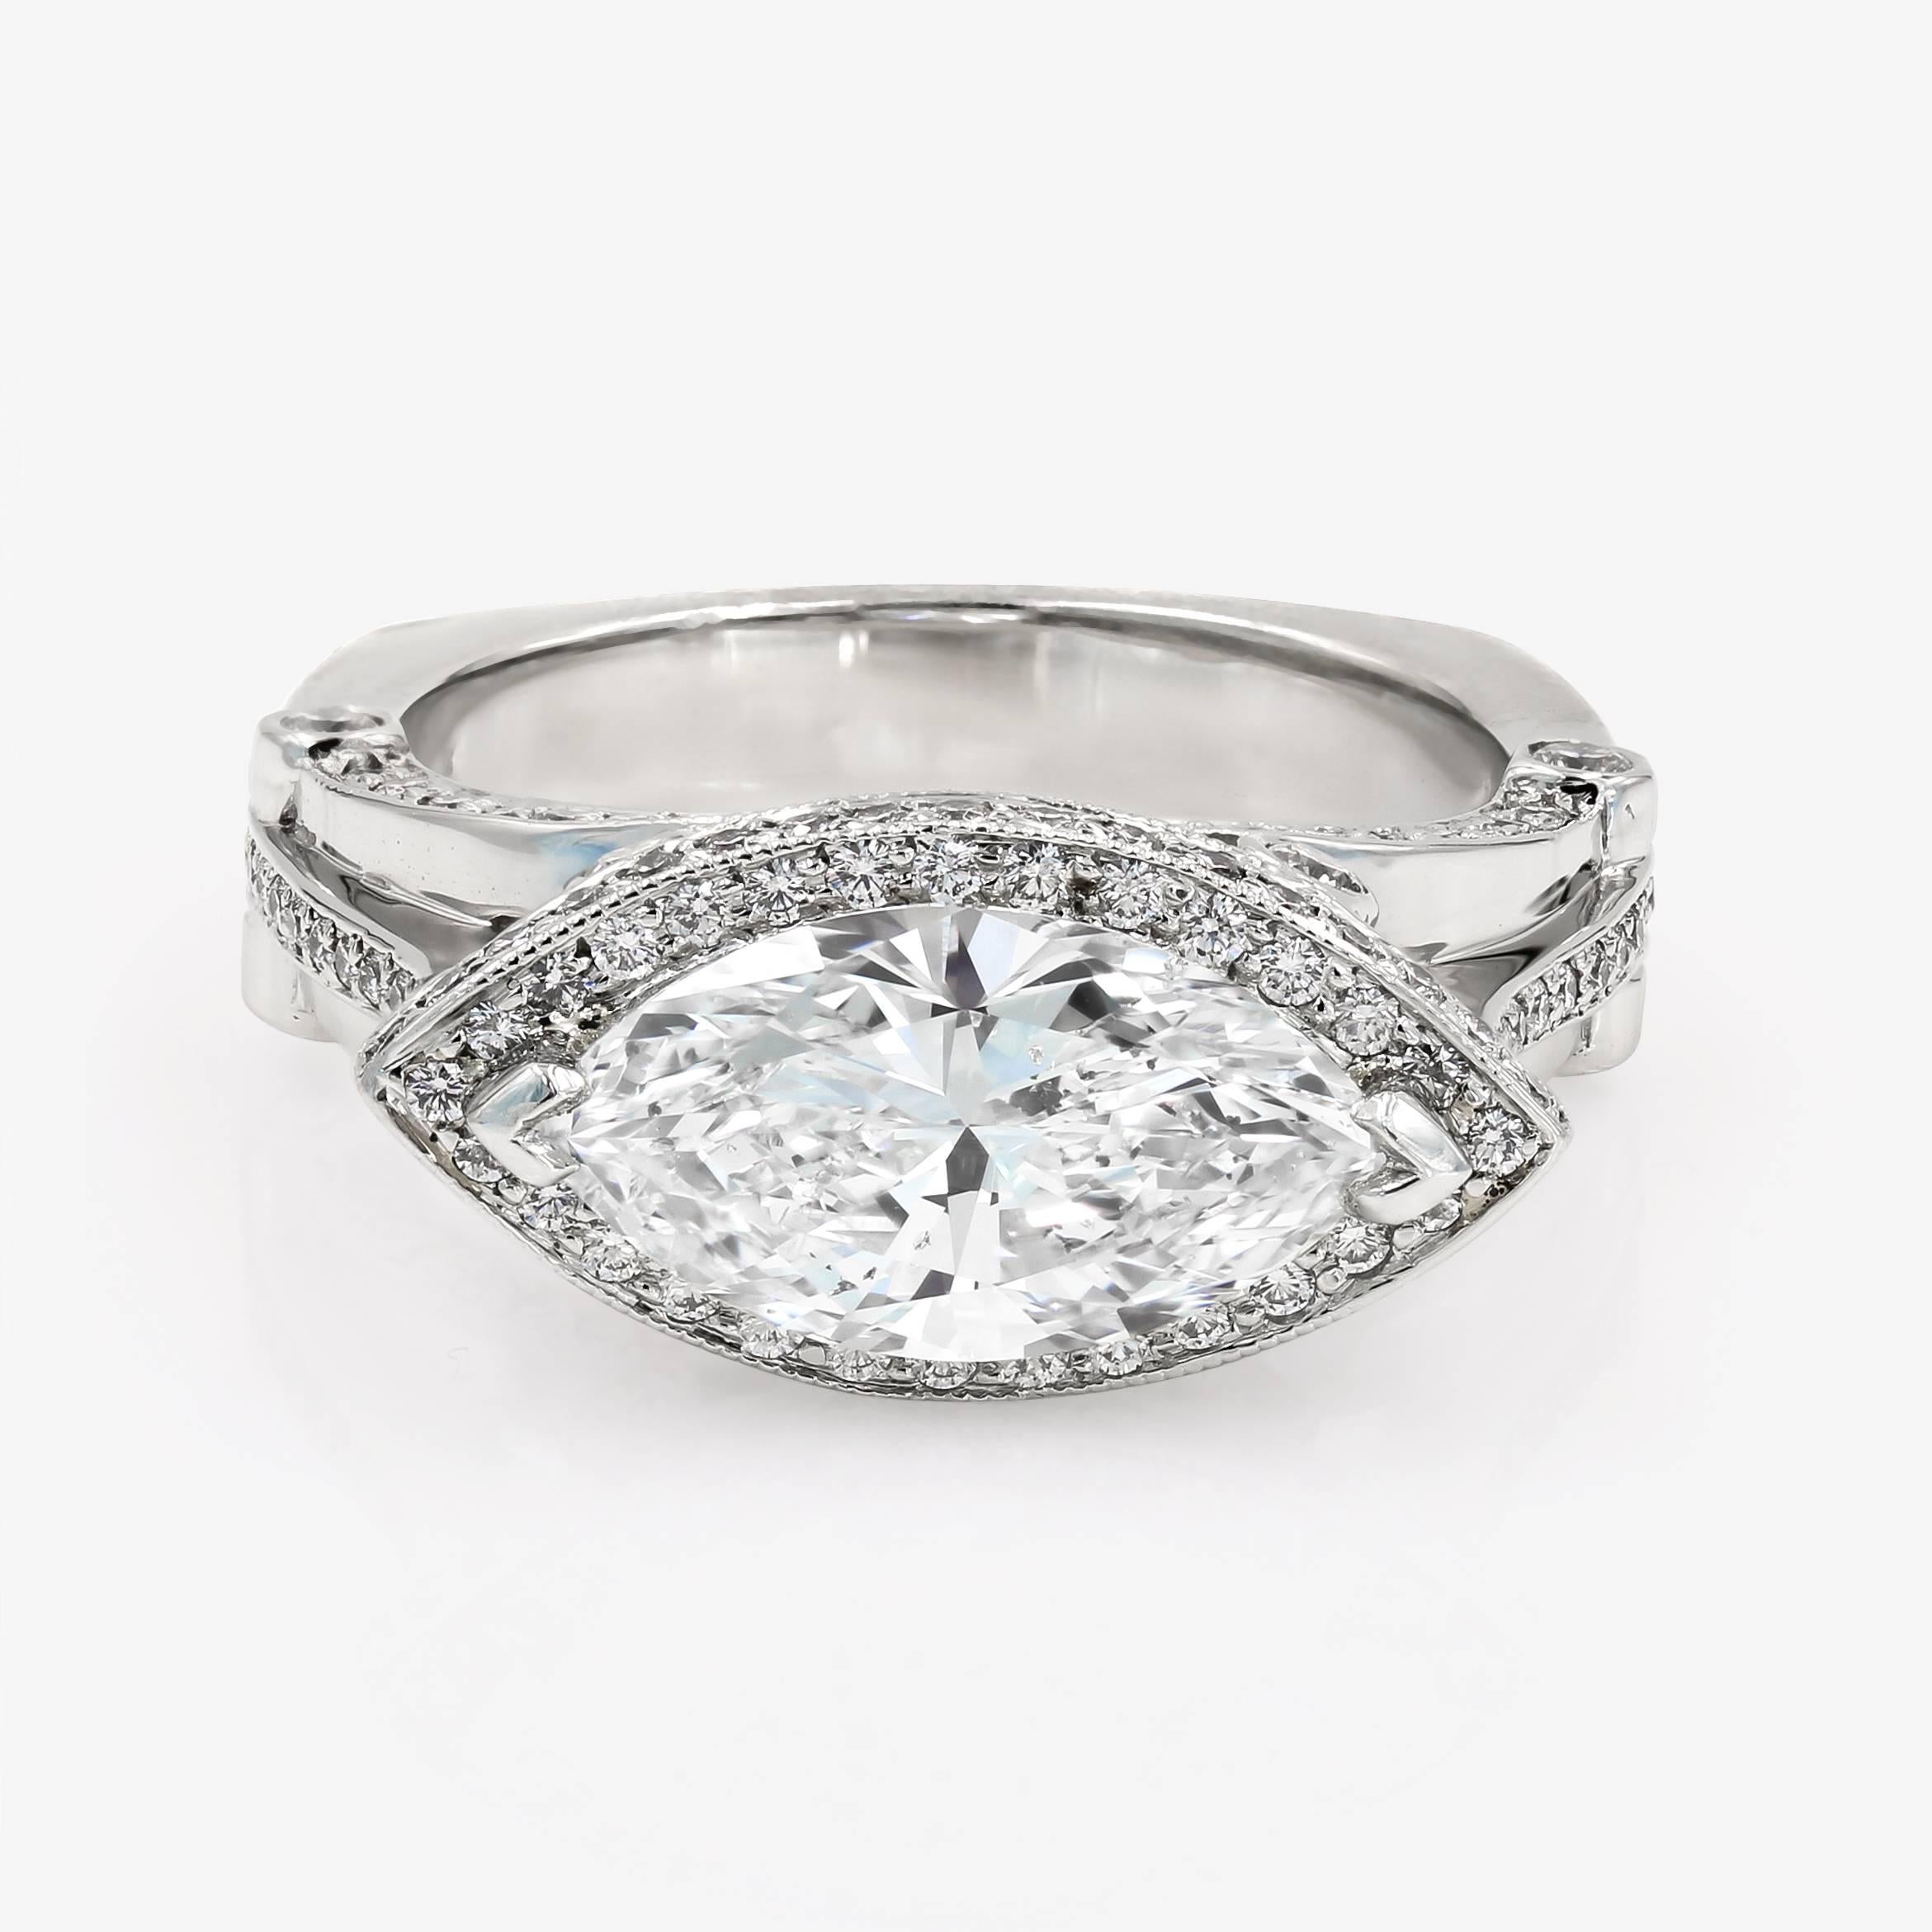 This stunning platinum ring contains a 2.54cts. marquise cut center H color and SI2 clarity, with 132 ideal cut round diamonds= .77ct. t.w. set in a halo style around the center and on the sides of the shank. (accent diamonds are G/VS)

This pieces